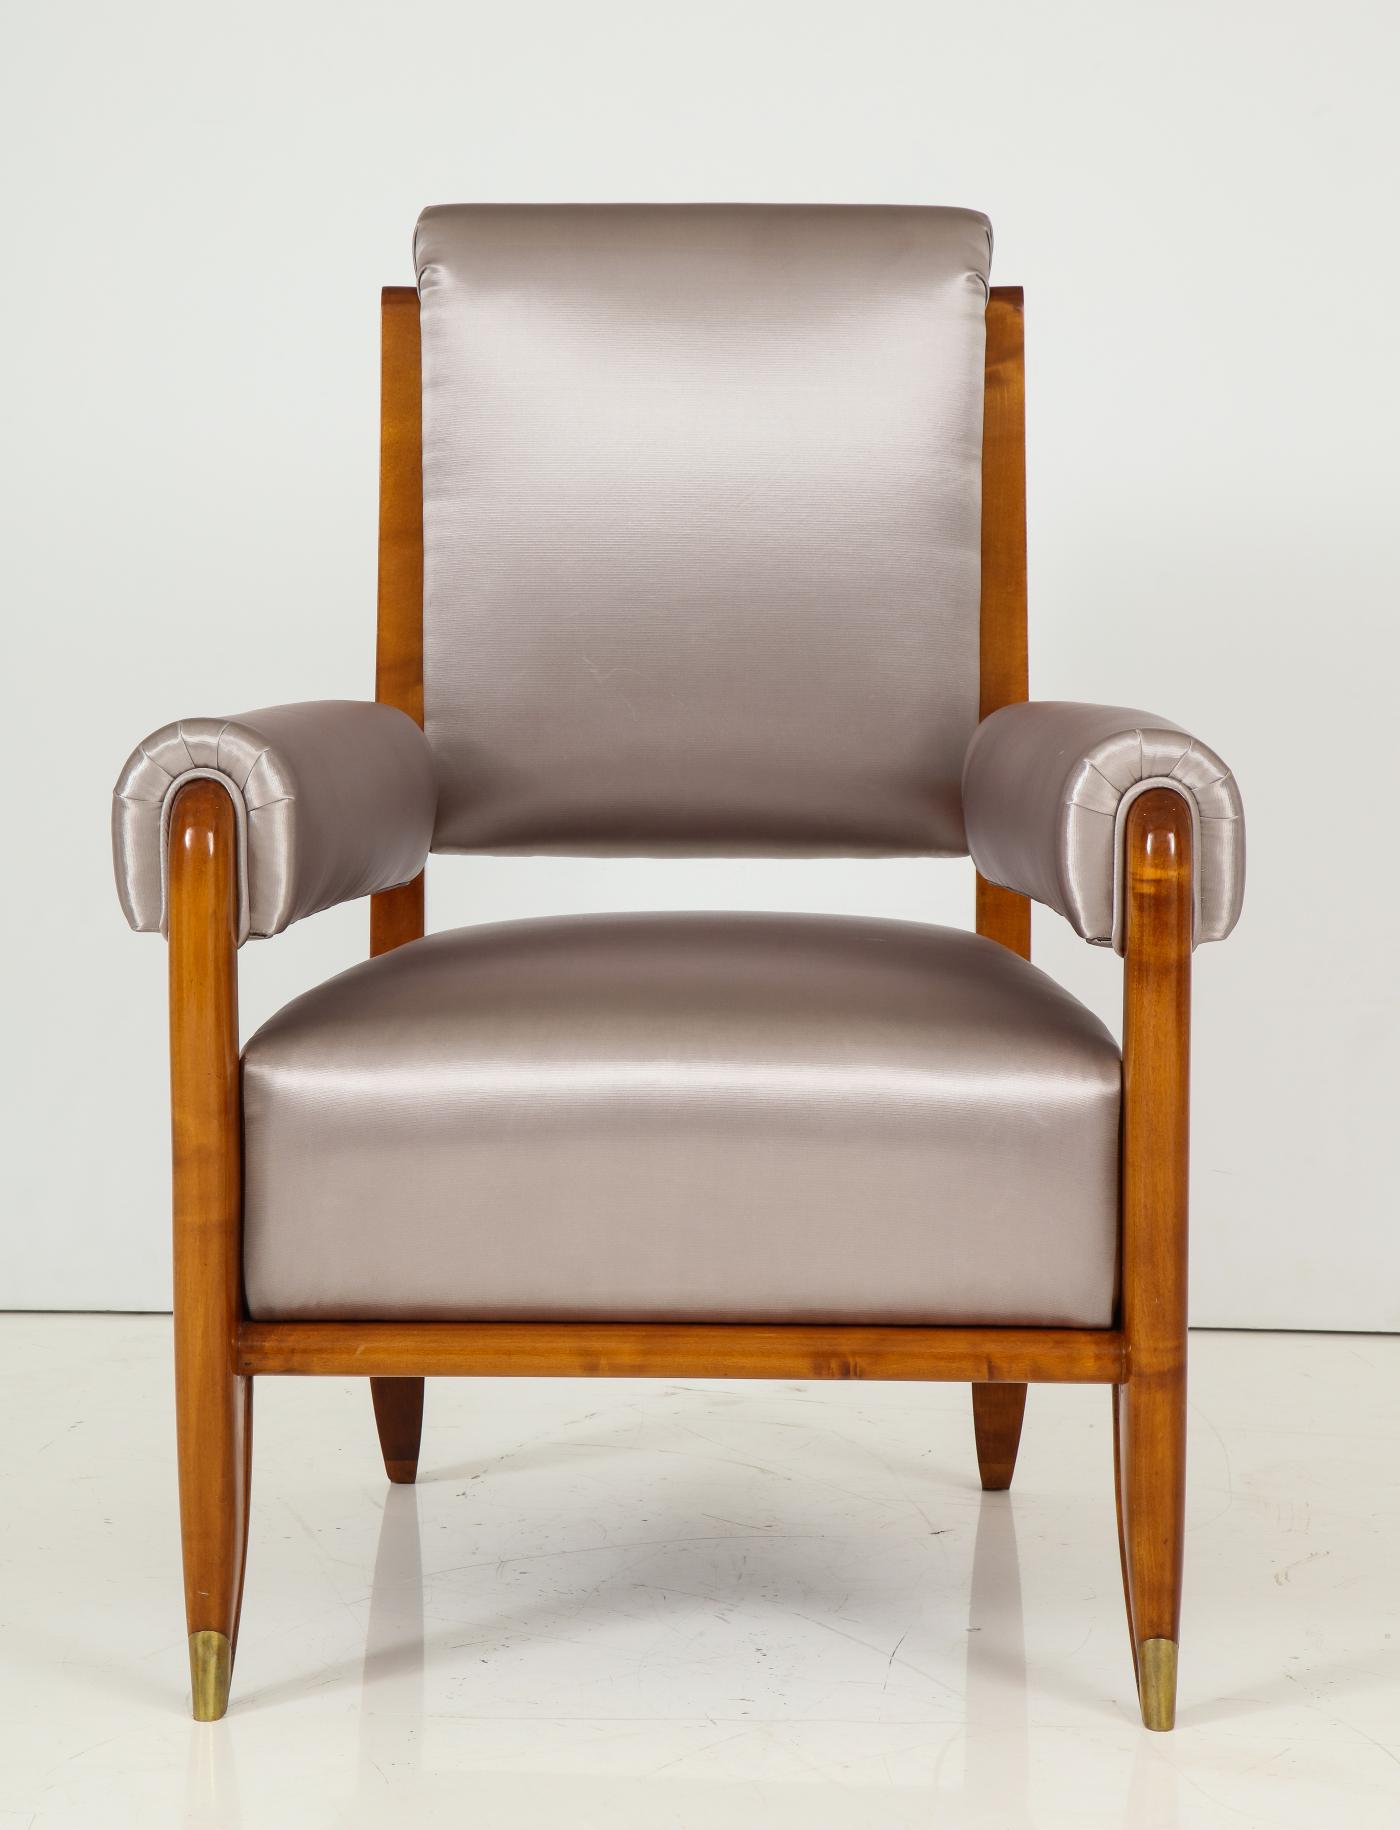 A Modernist armchair designed by Maurice Jallot